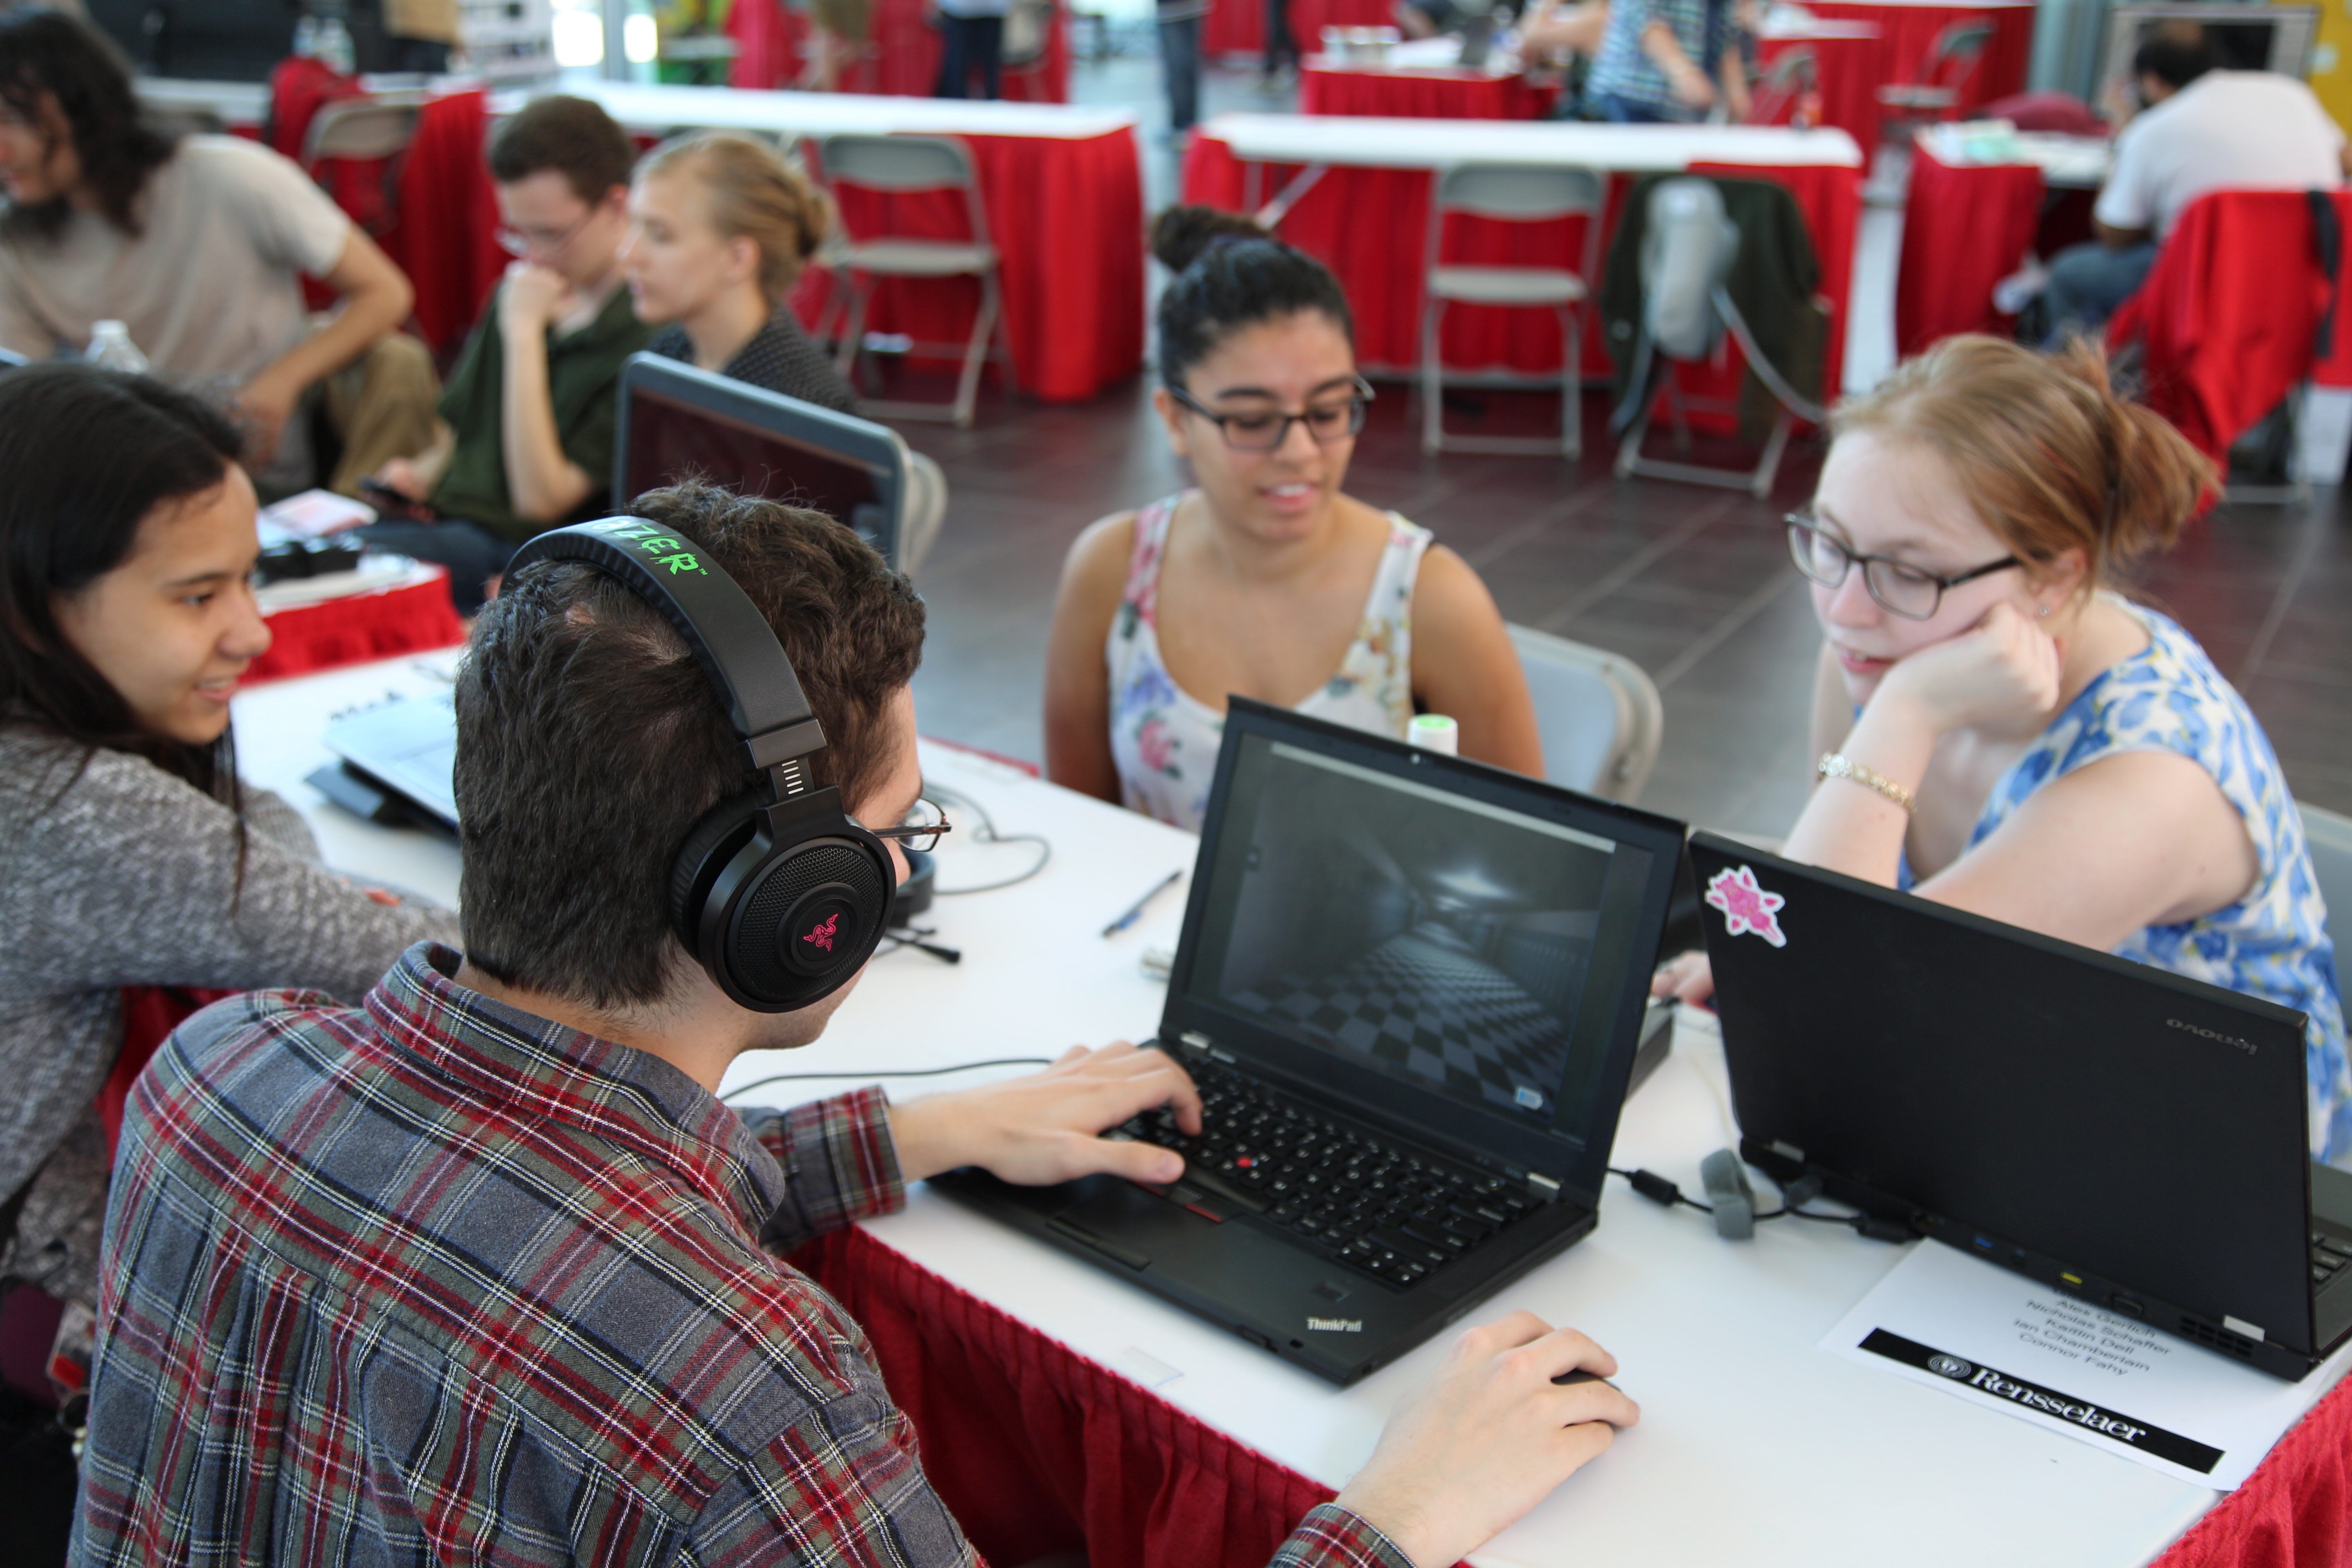 Three students watch a fourth playing a laptop game at GameFest 2016.